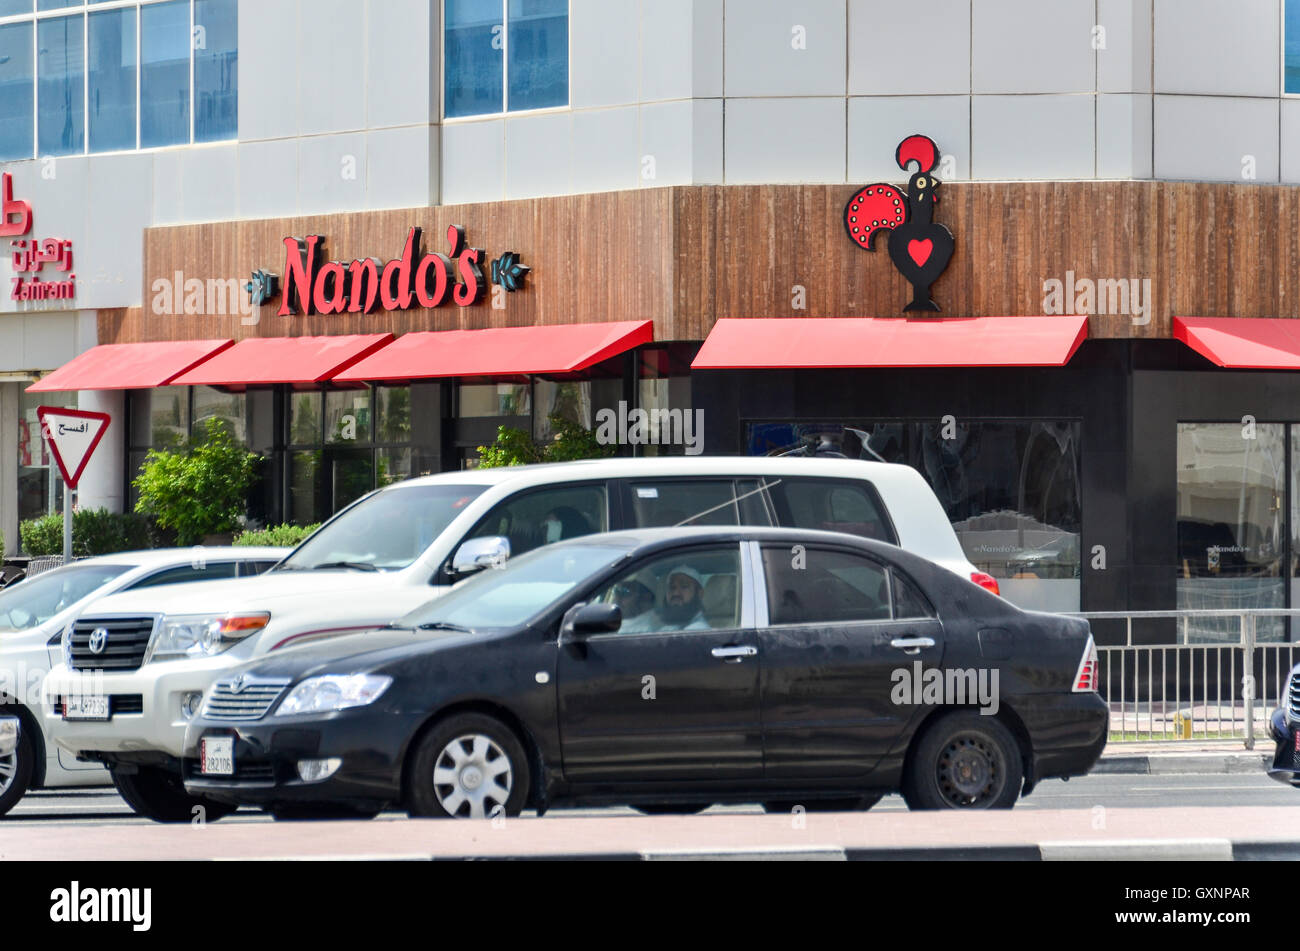 Nando's South African fast food chain in Doha, Qatar Stock Photo